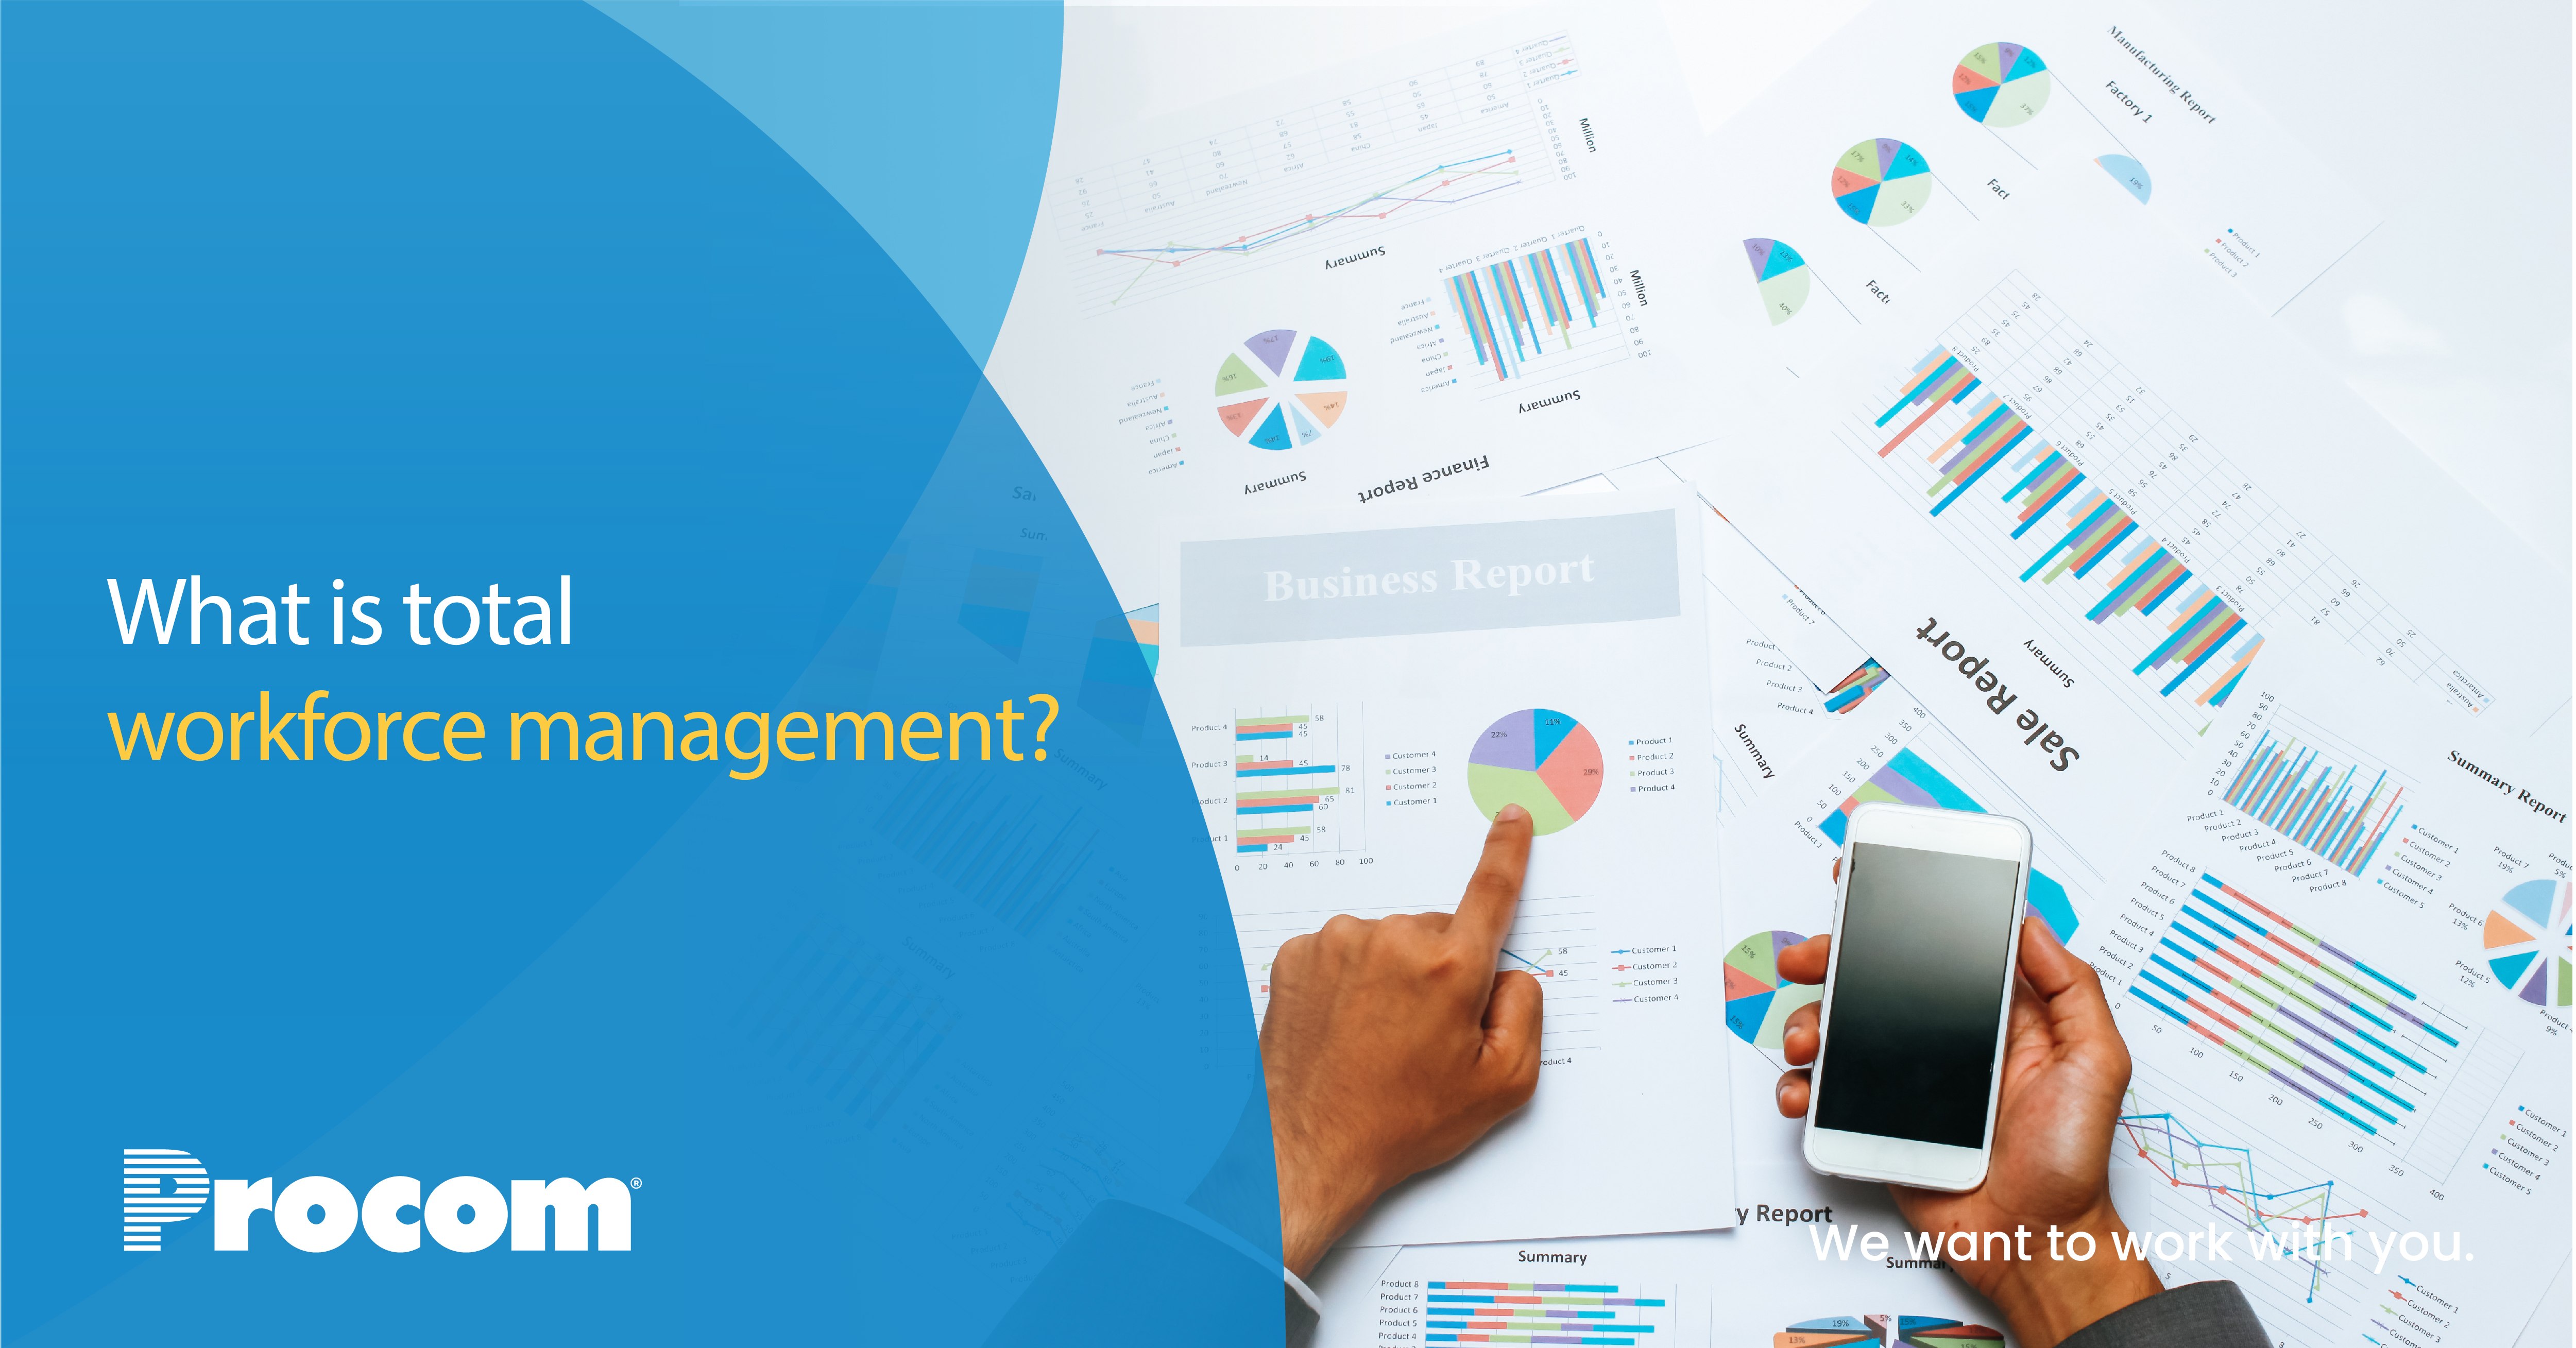 What is total workforce management?